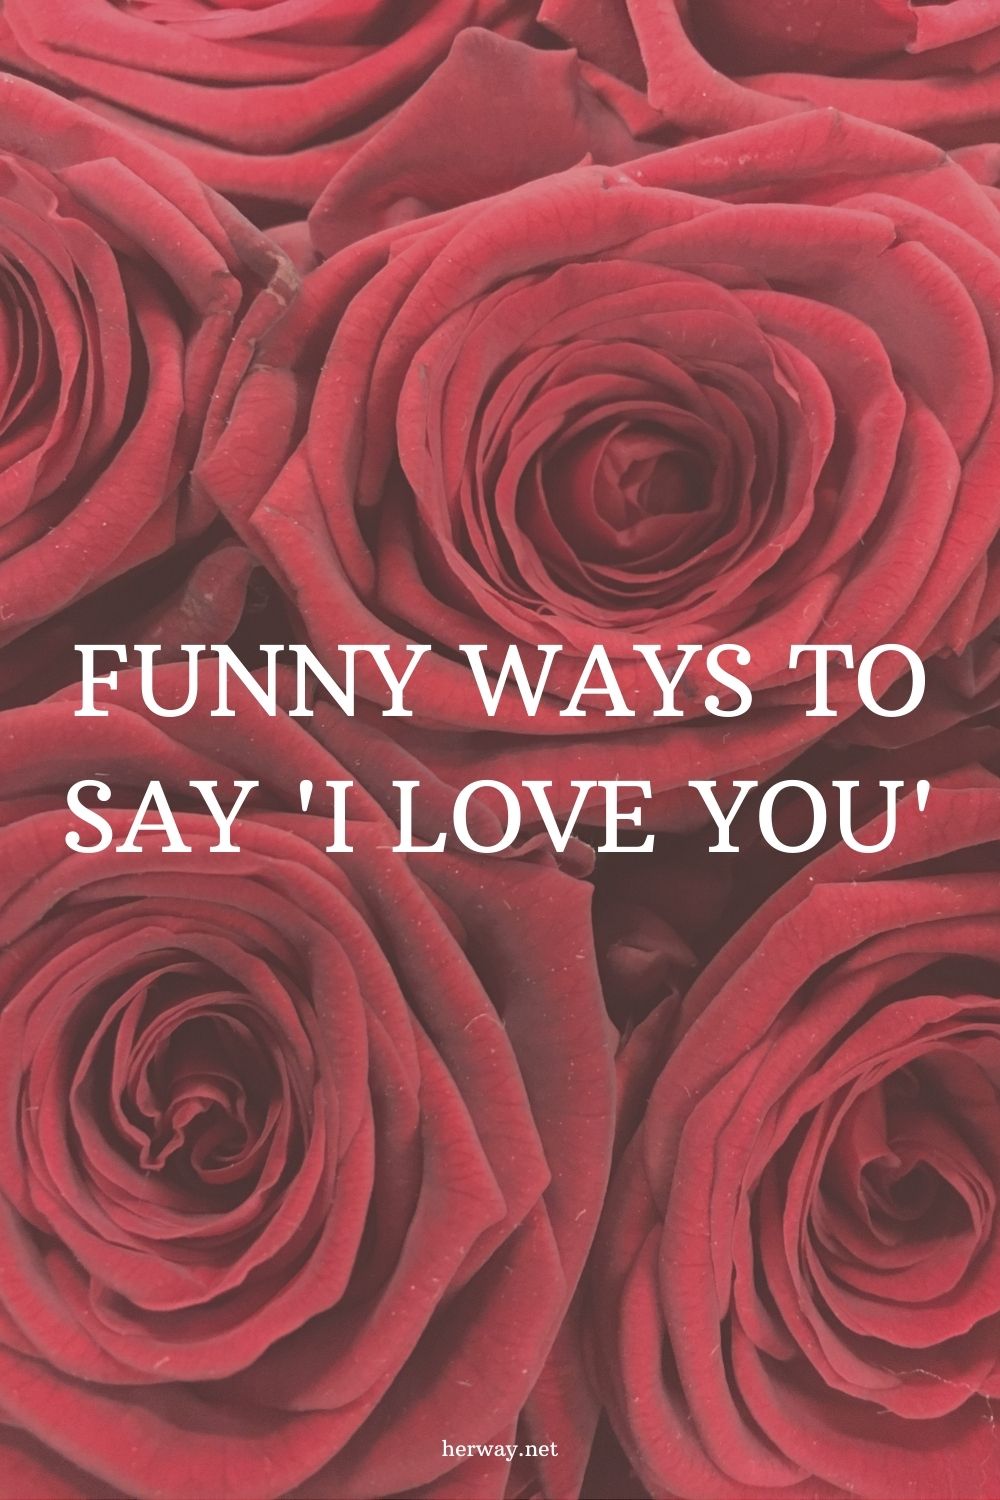 150 Creative Ways To Say 'I Love You' To Your Special Someone